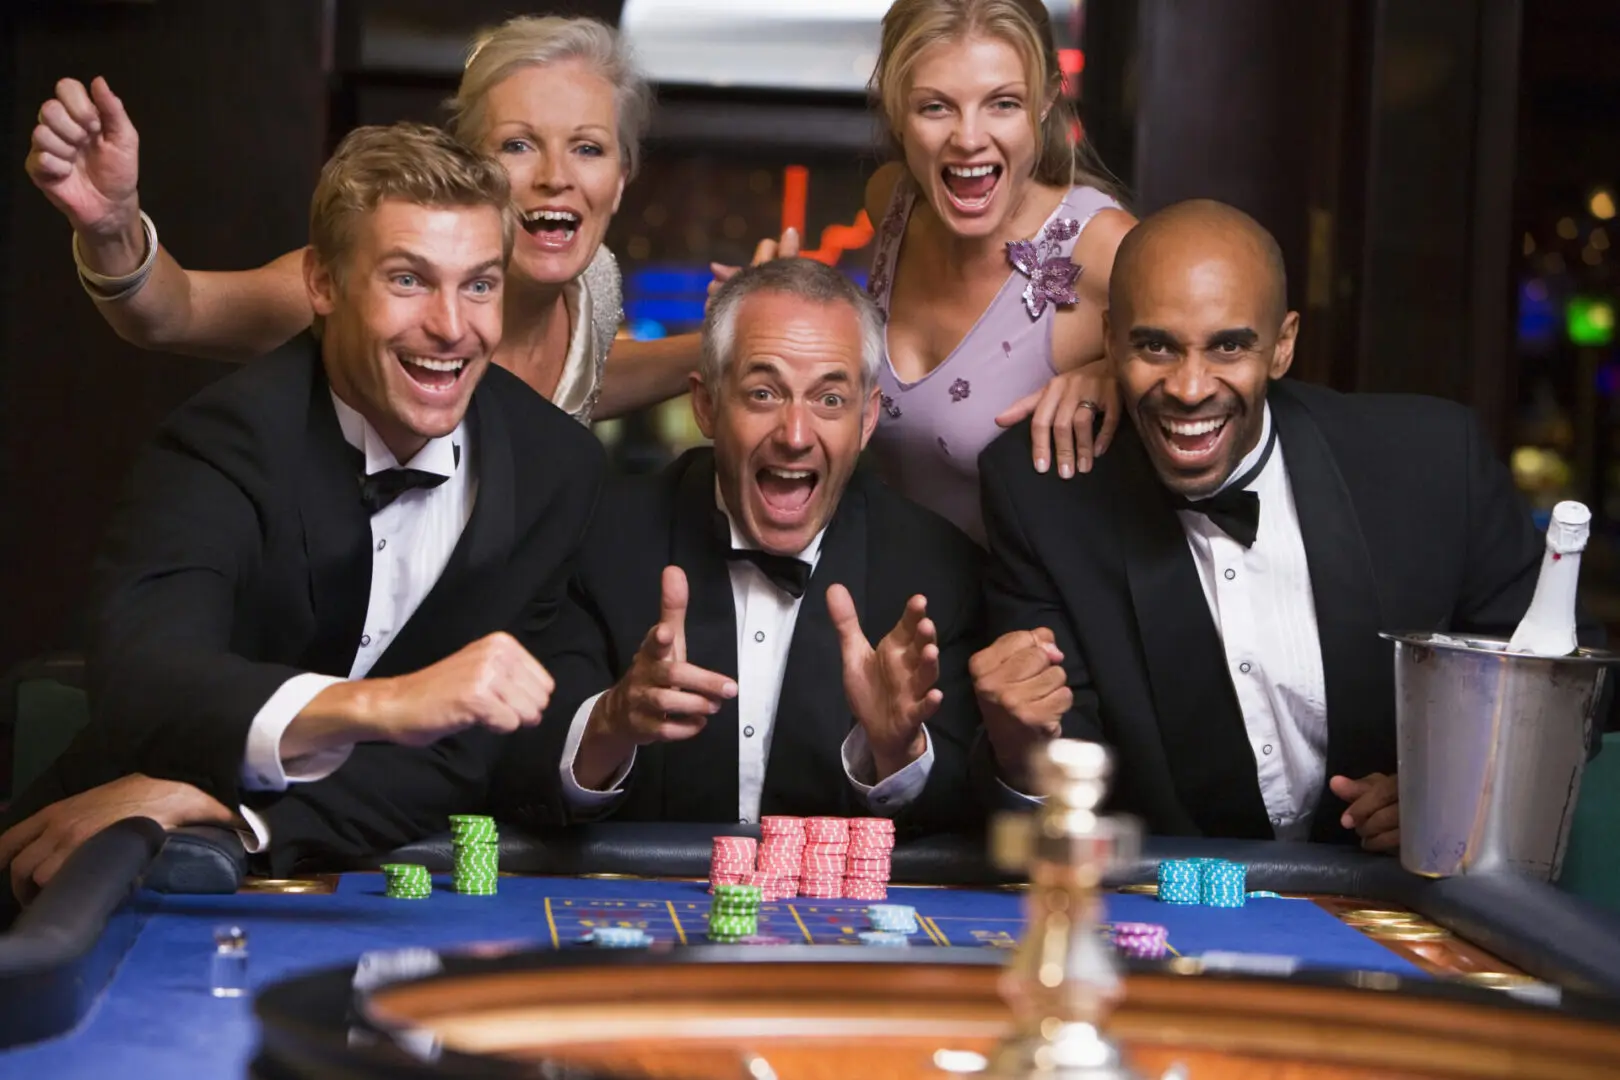 A group of people in suits and ties at a casino.